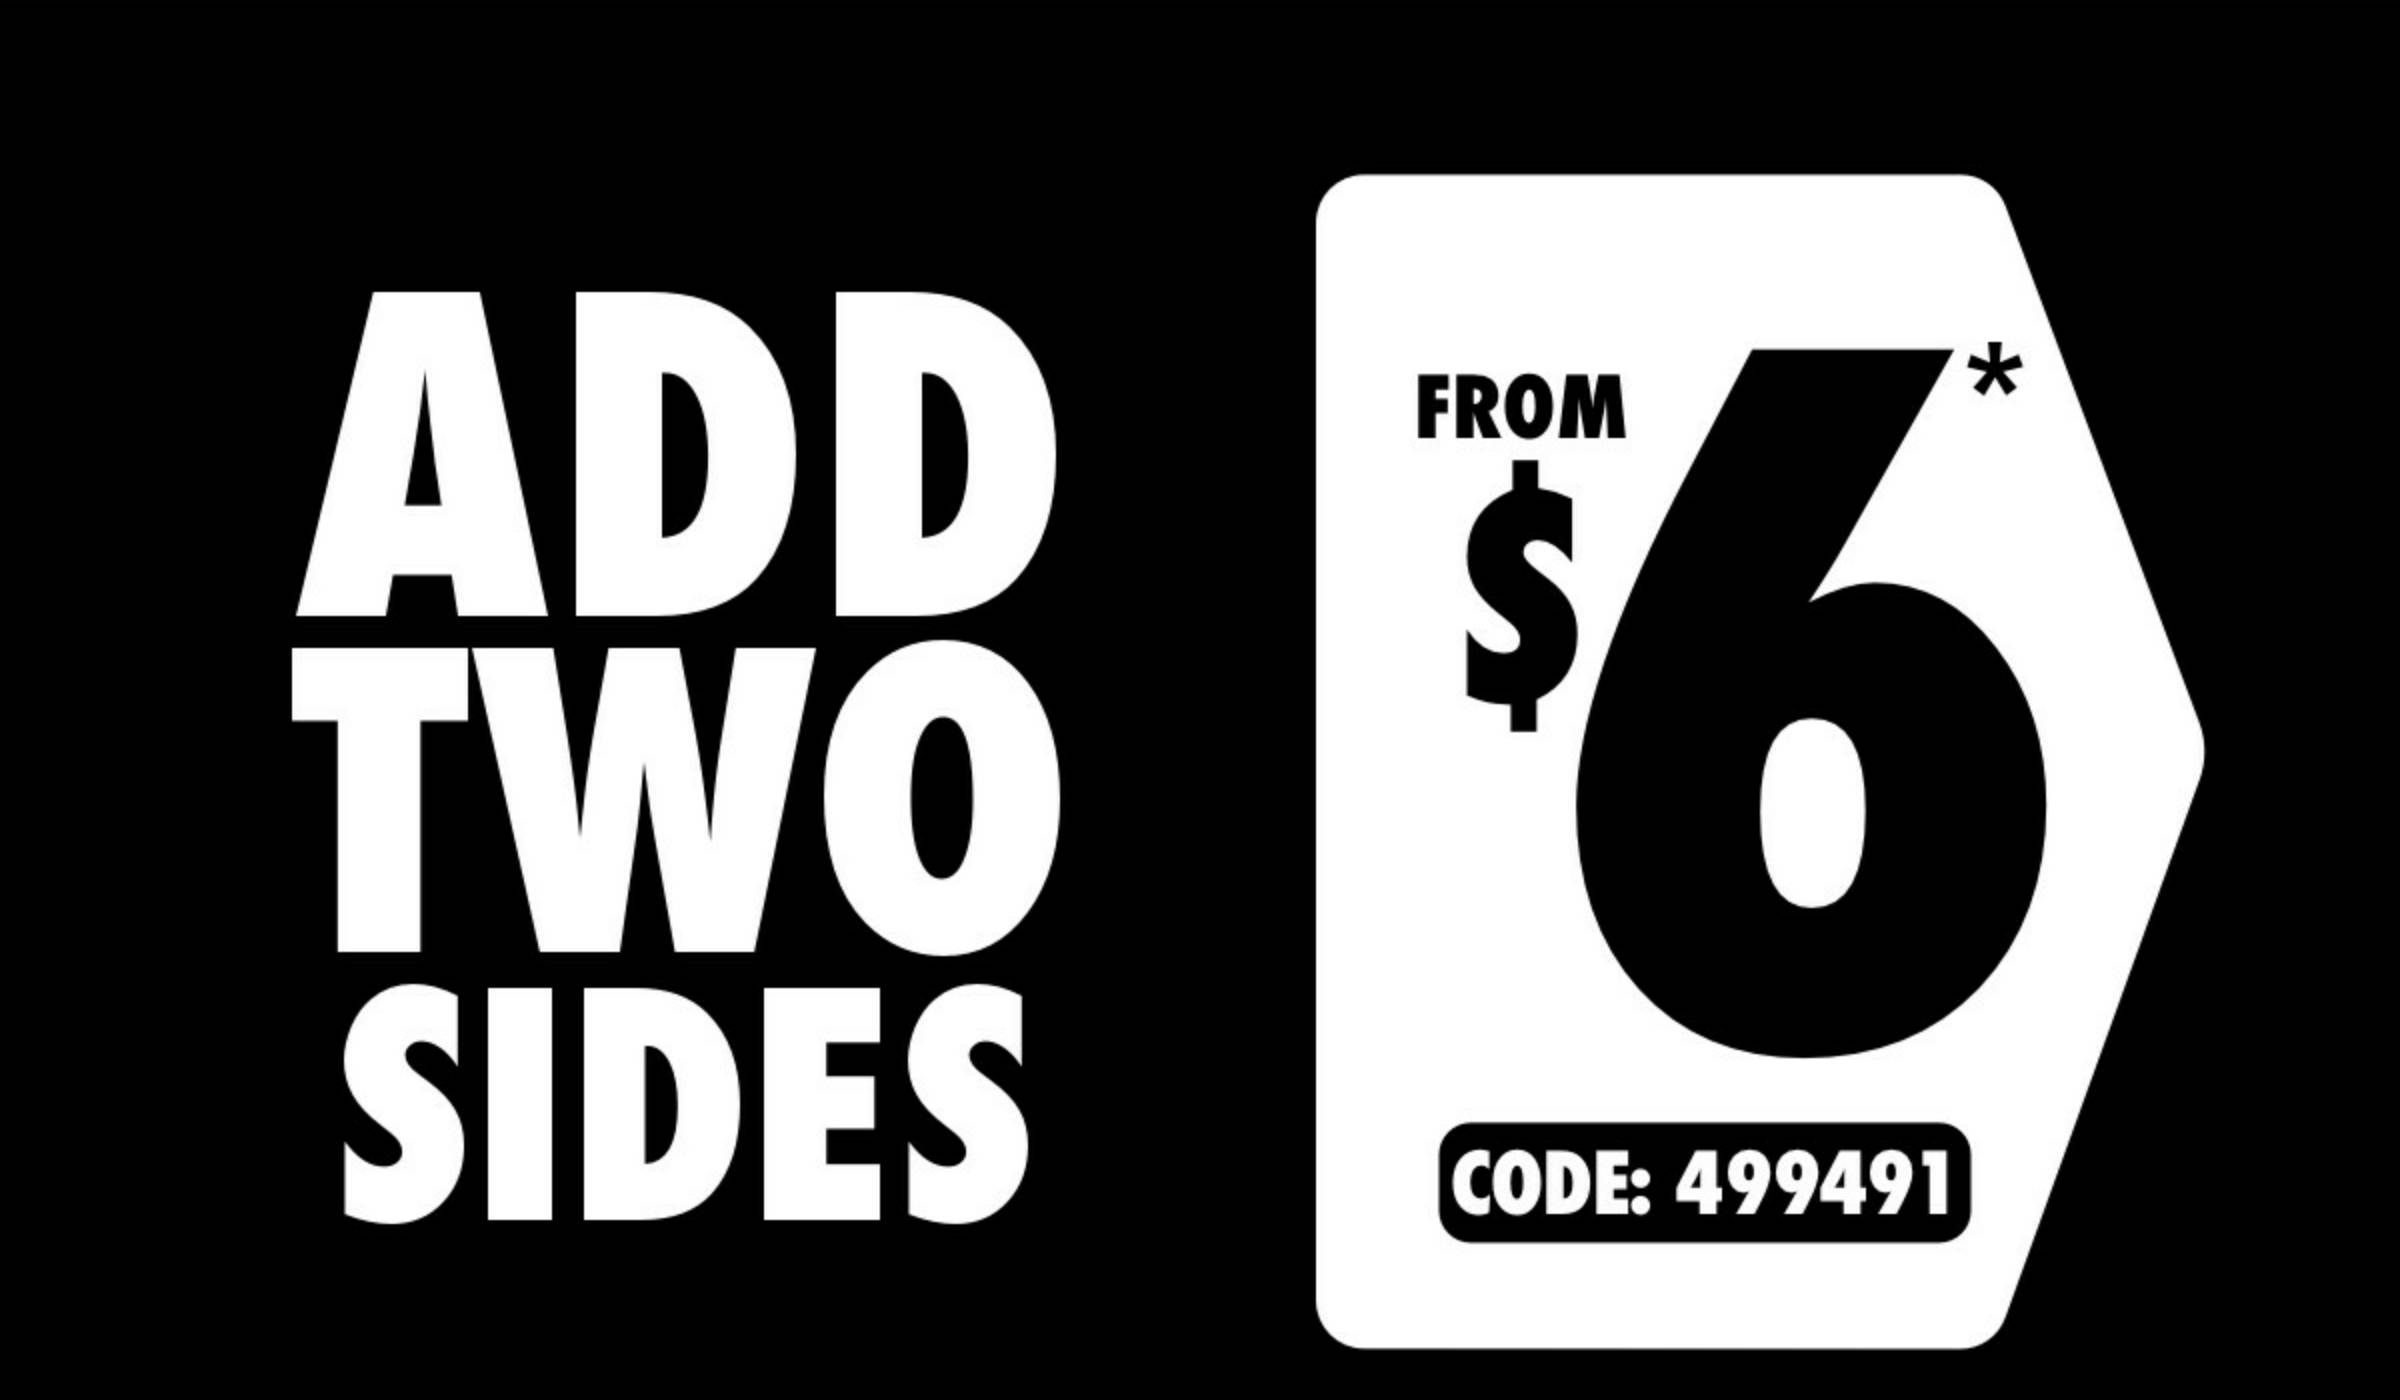 Domino's - Add Two Sides from $6